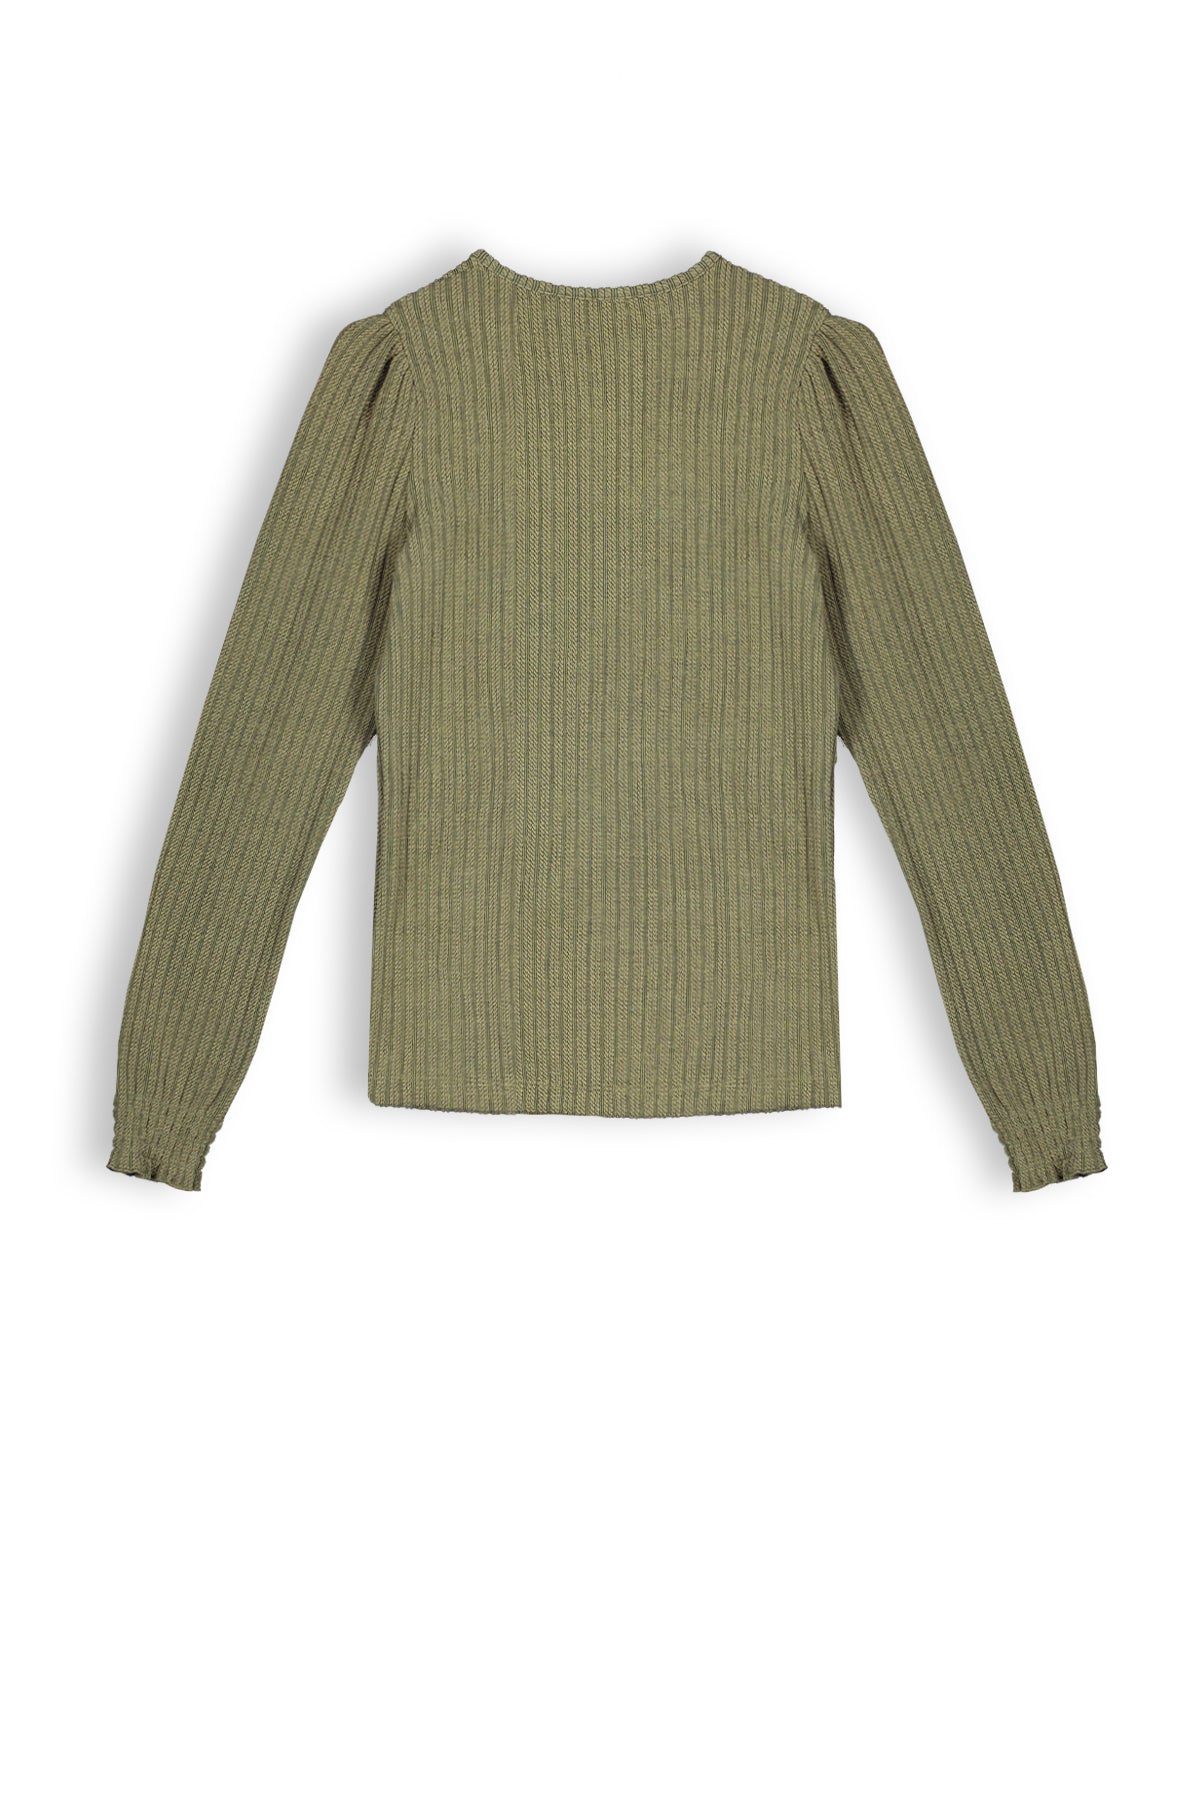 NoBell Kobo girls cable jersey tshirt l/sl olive green